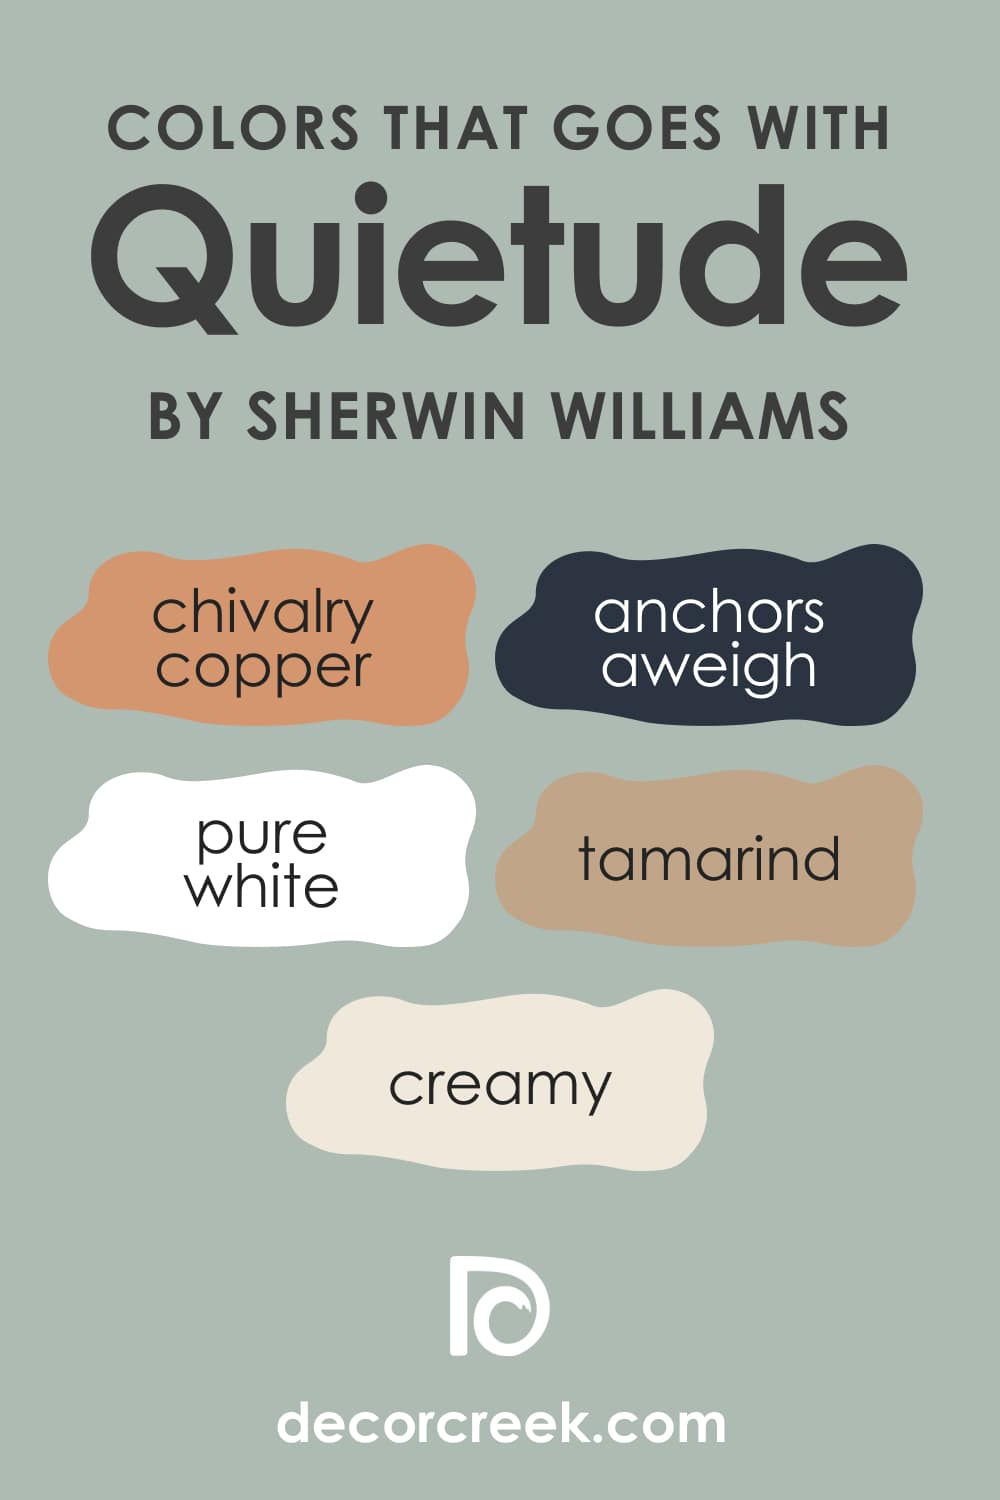 Colors That Go With Sherwin-Williams Quietude